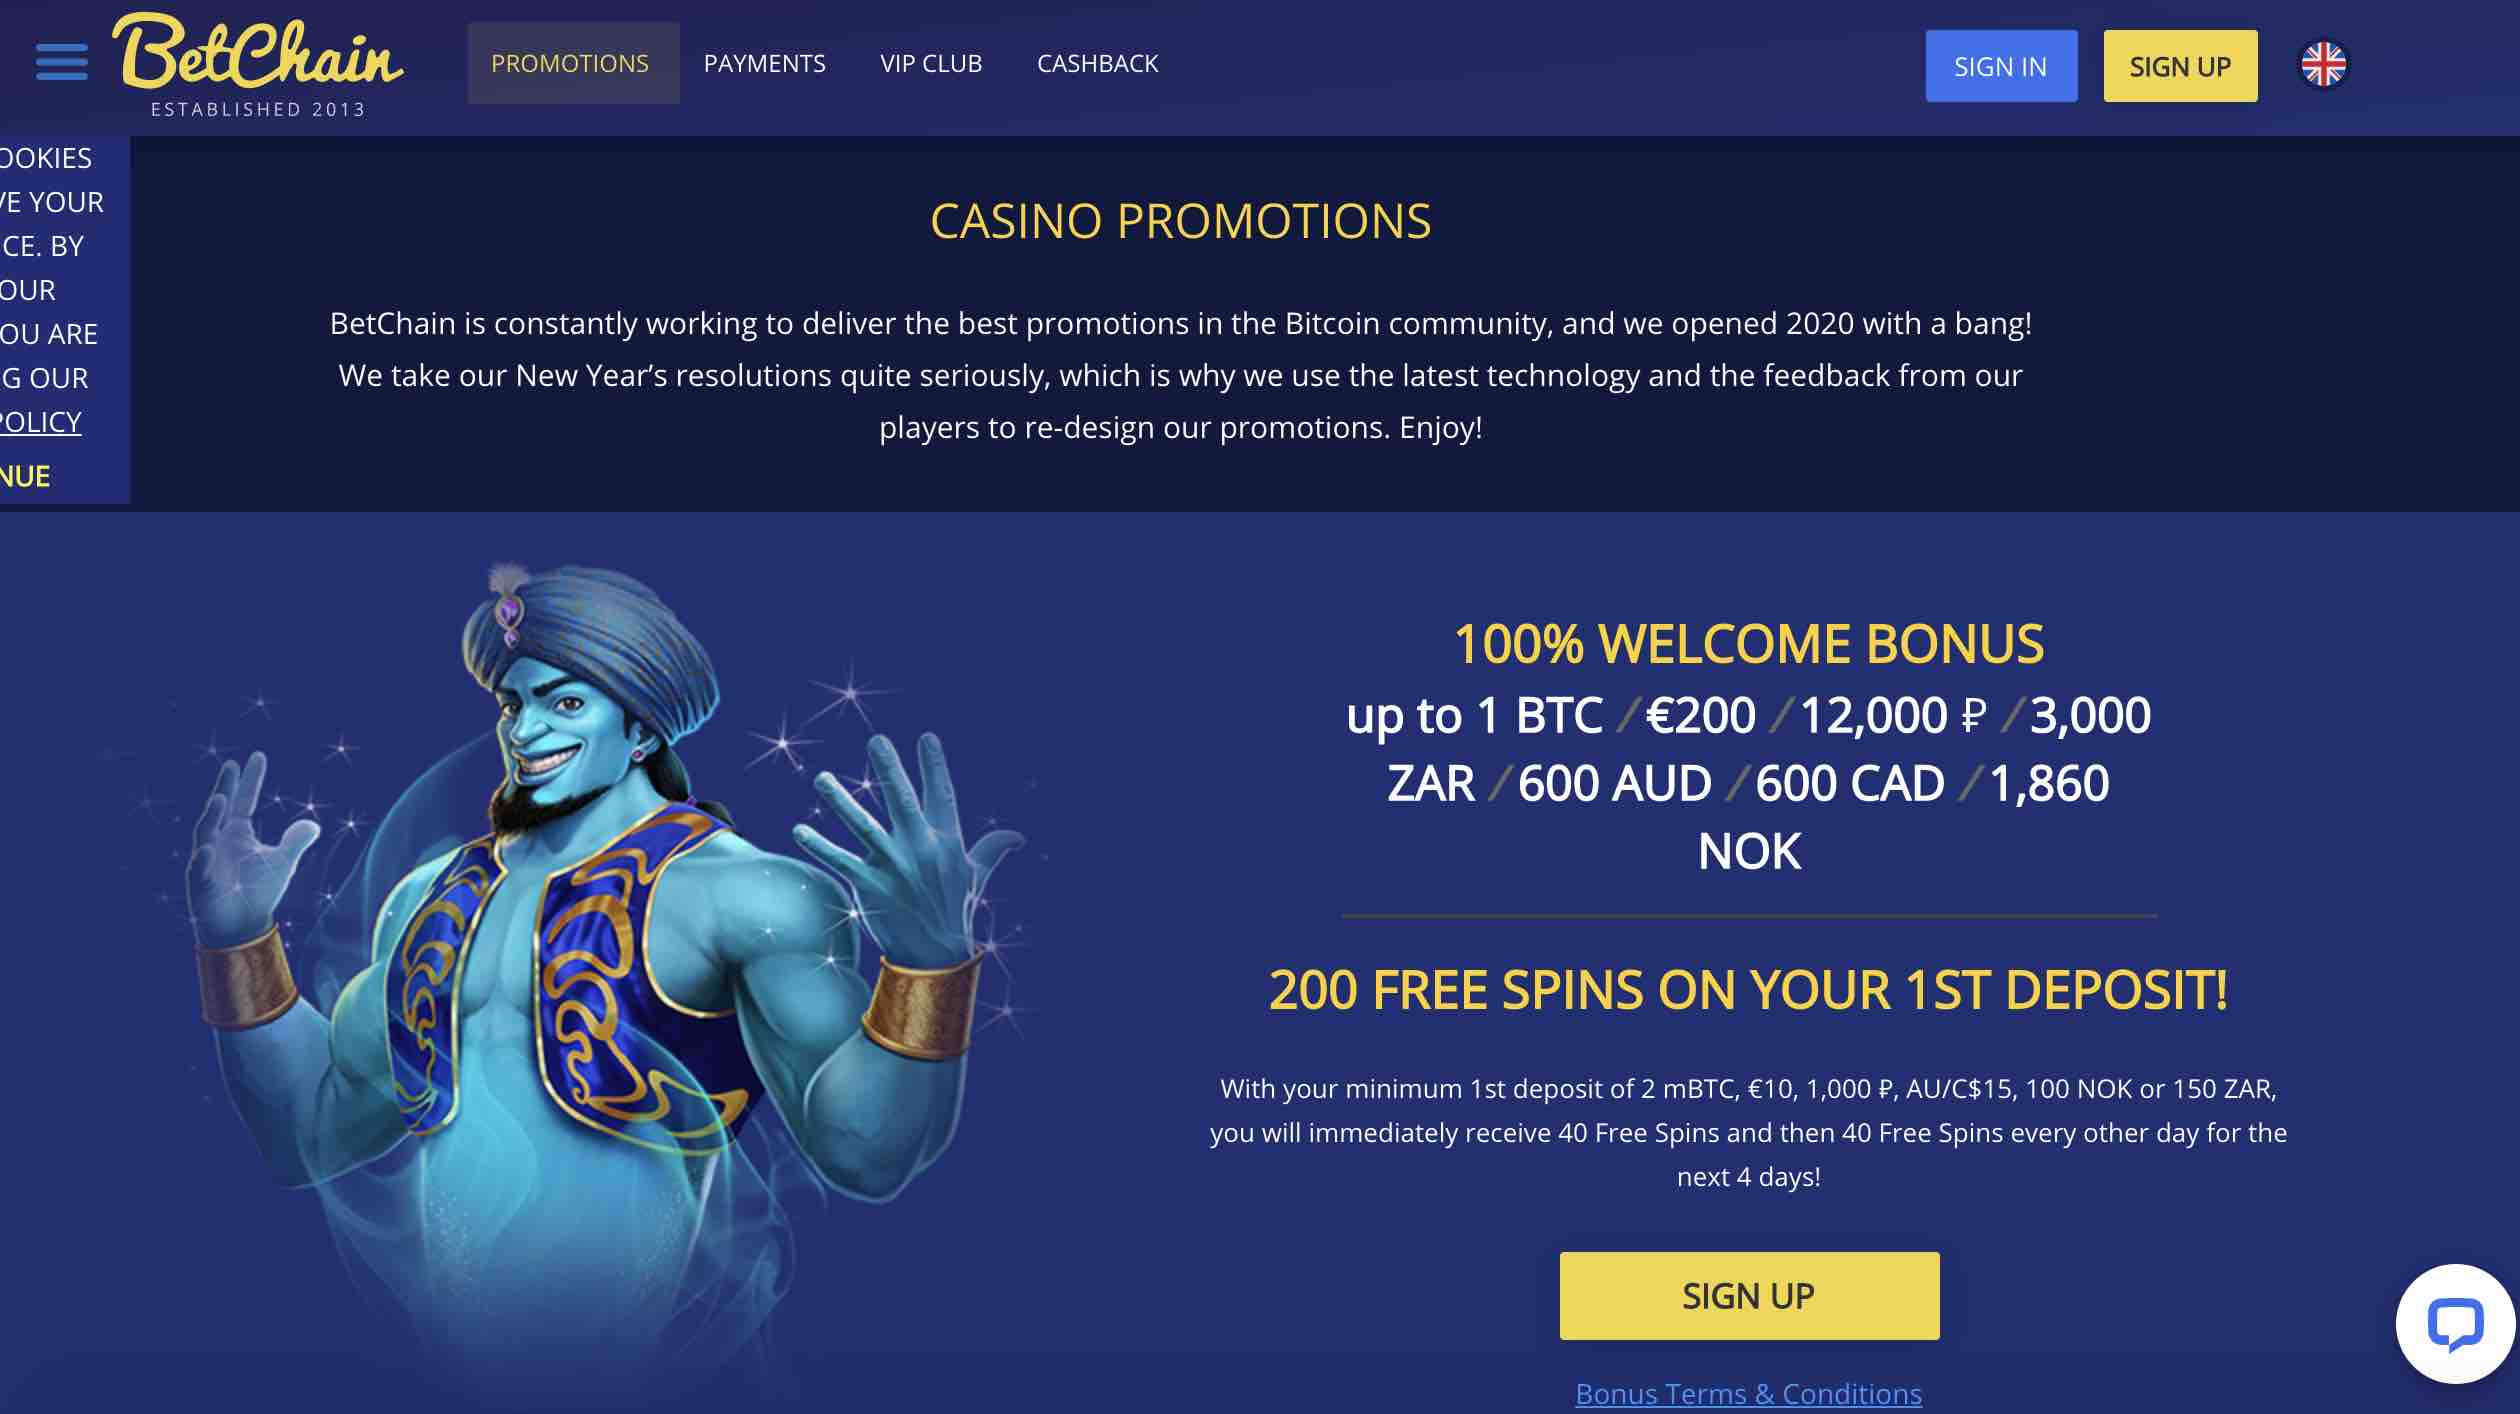 Promotions at BetChain Casino